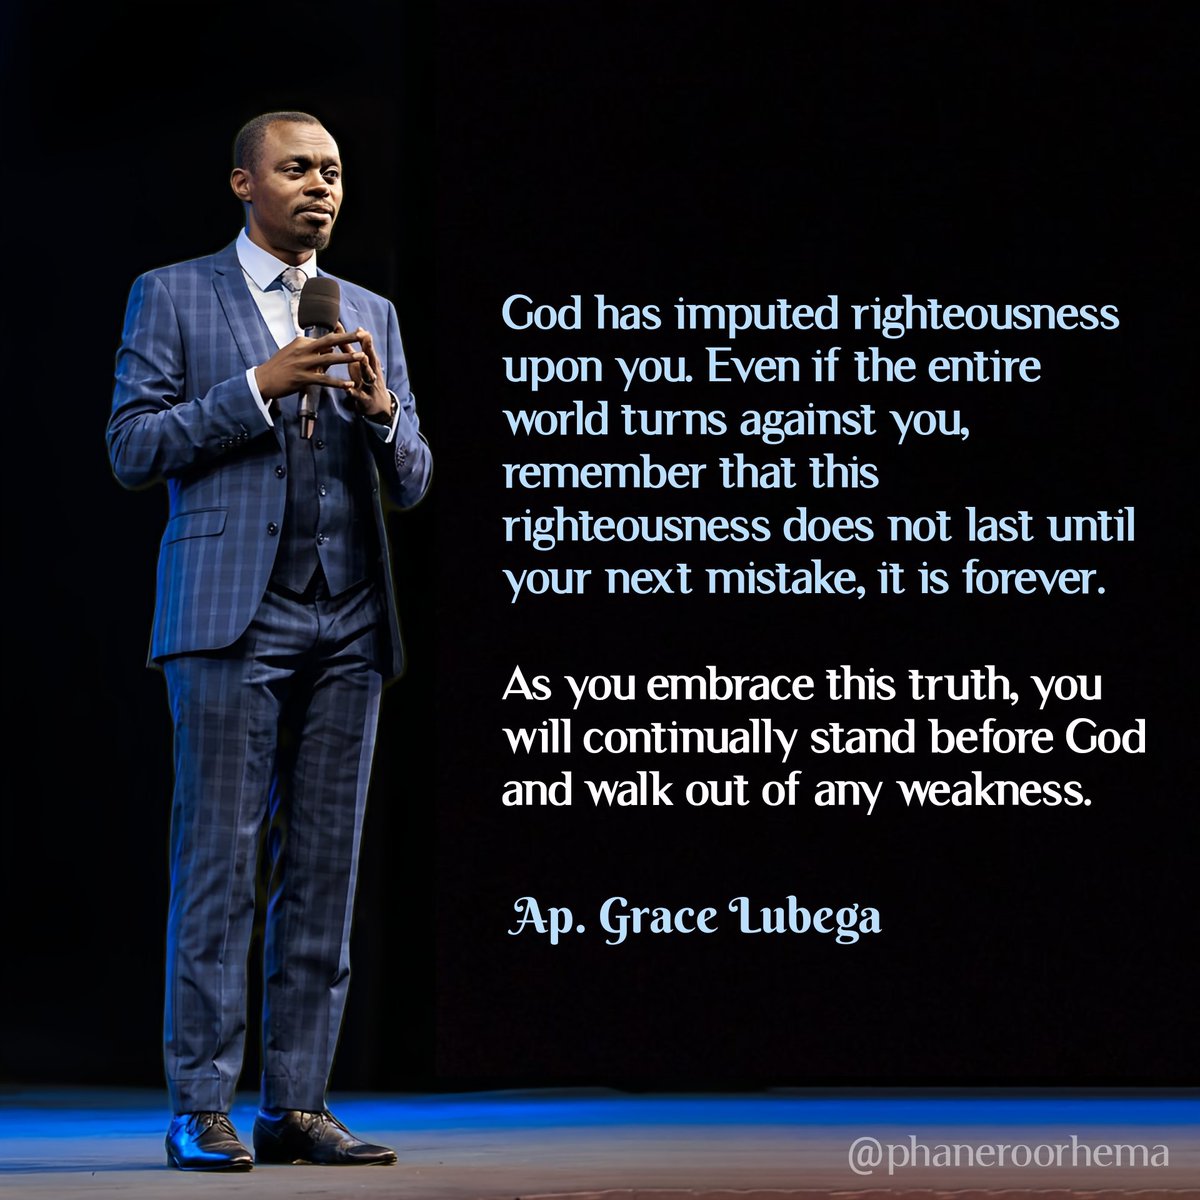 God has imputed righteousness upon you. Even if the entire world turns against you, remember that this righteousness does not last until your next mistake, it is forever.

Ap. Grace Lubega
#PhanerooRhema 
#MyGreatPrice2024
#WomenofPrayer